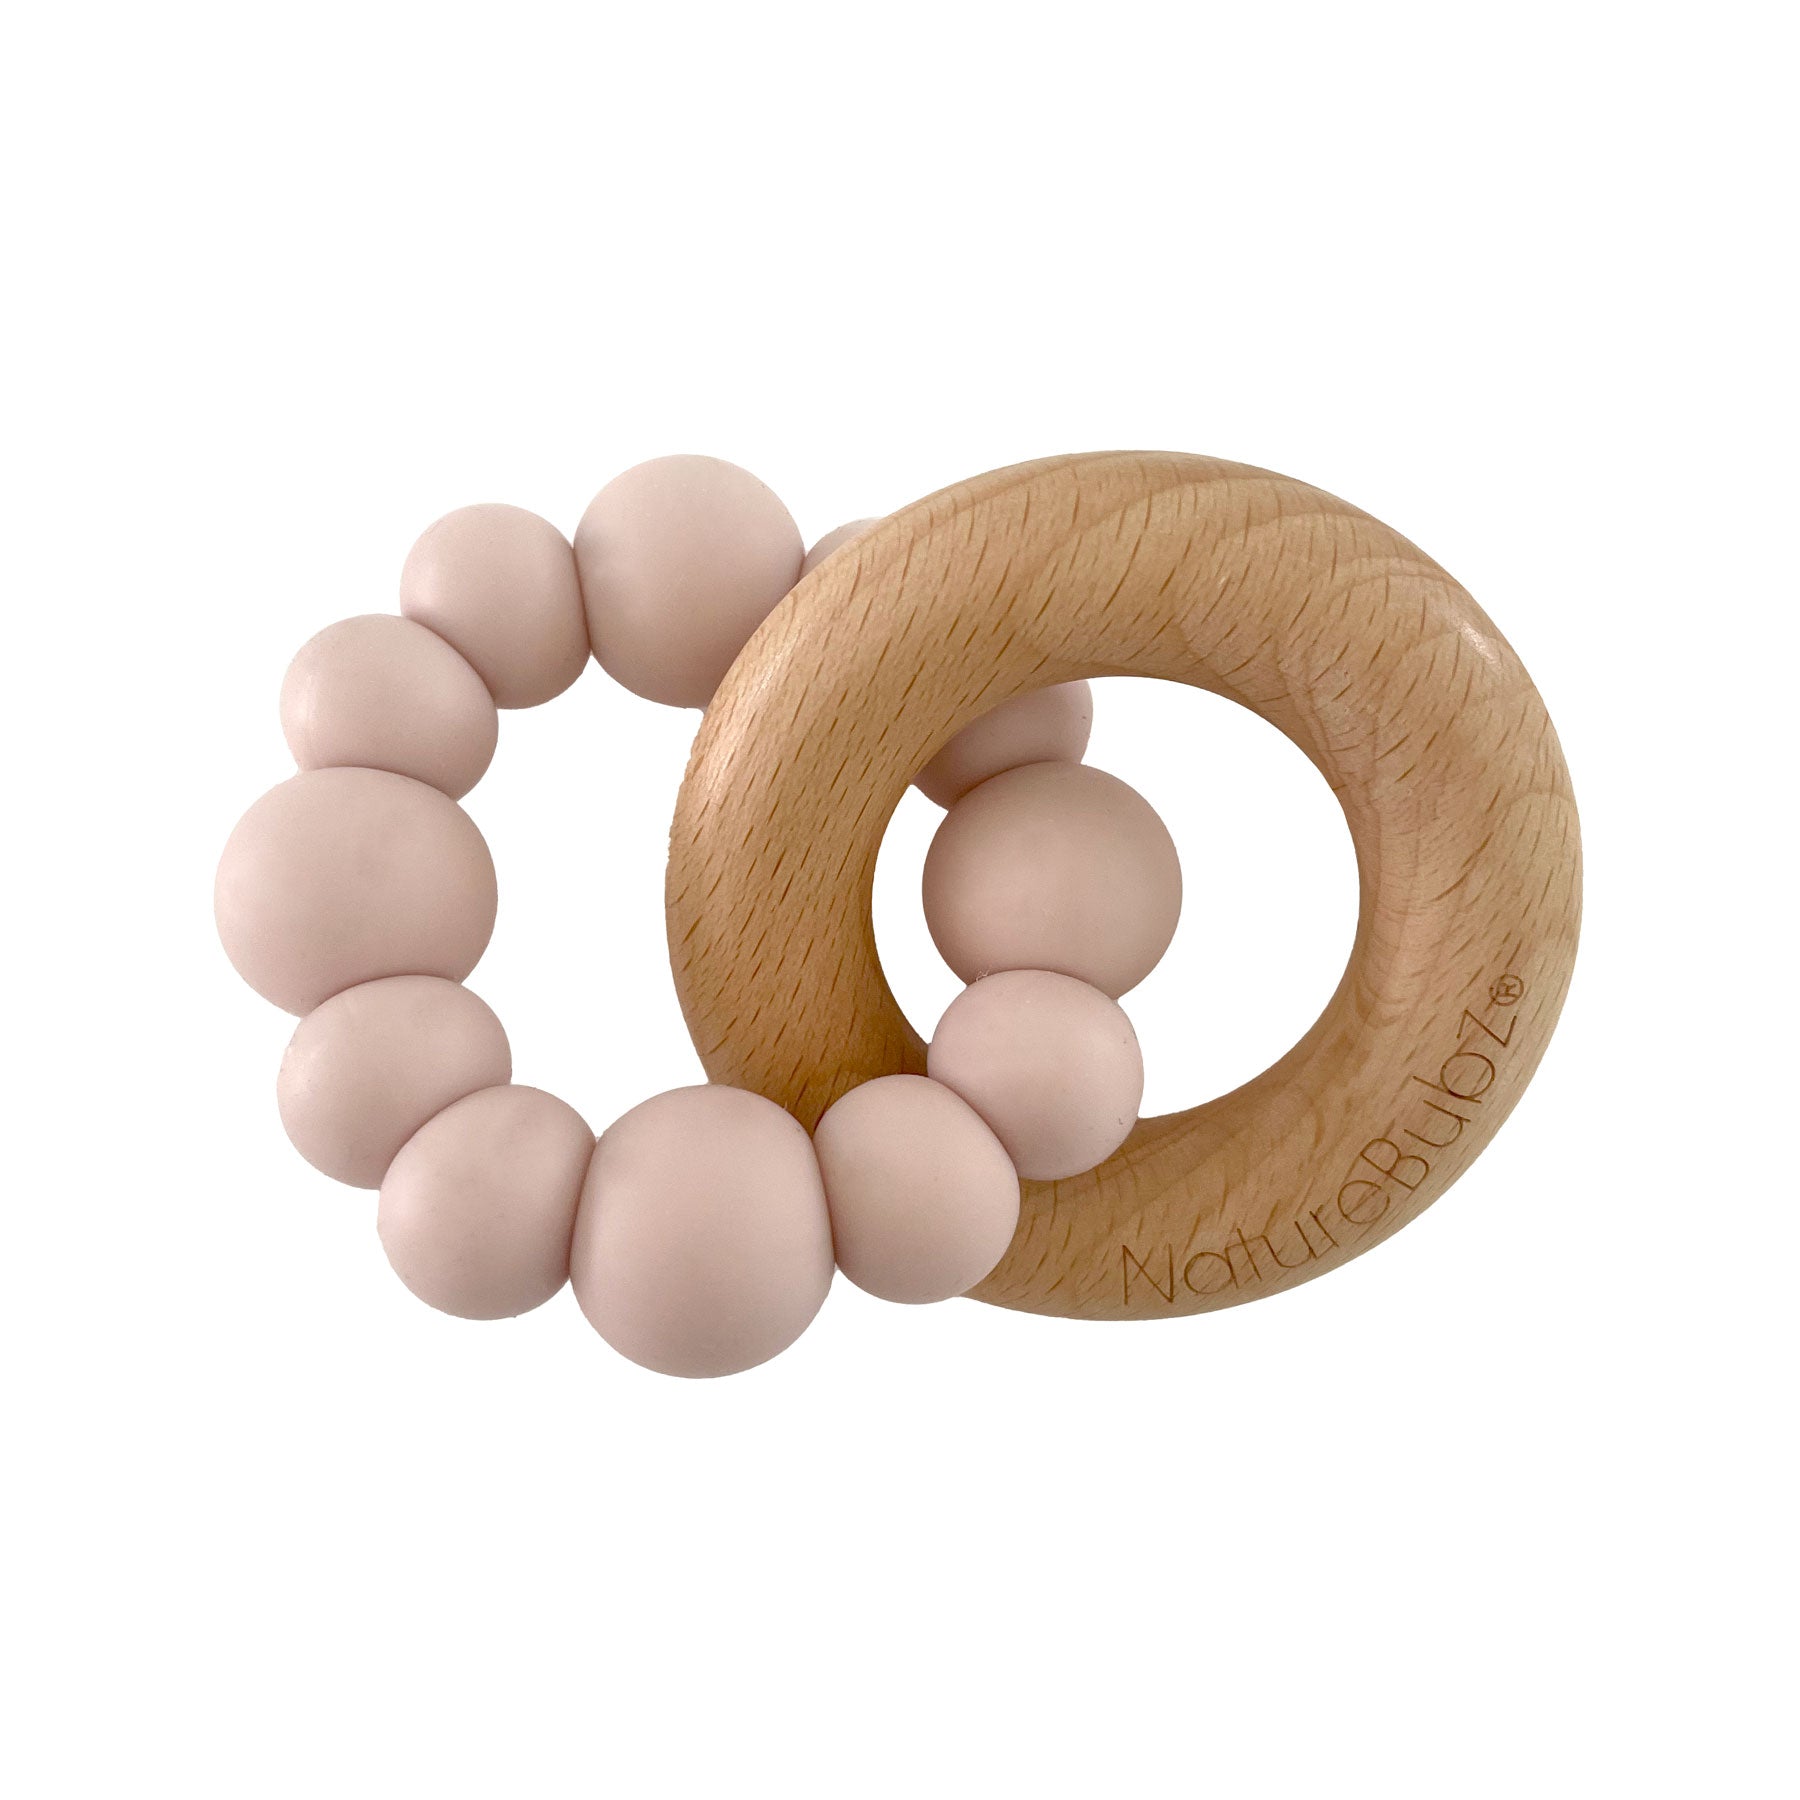 Nature Bubz Baby Silicone Cove Teether in Dusky Pink Colour